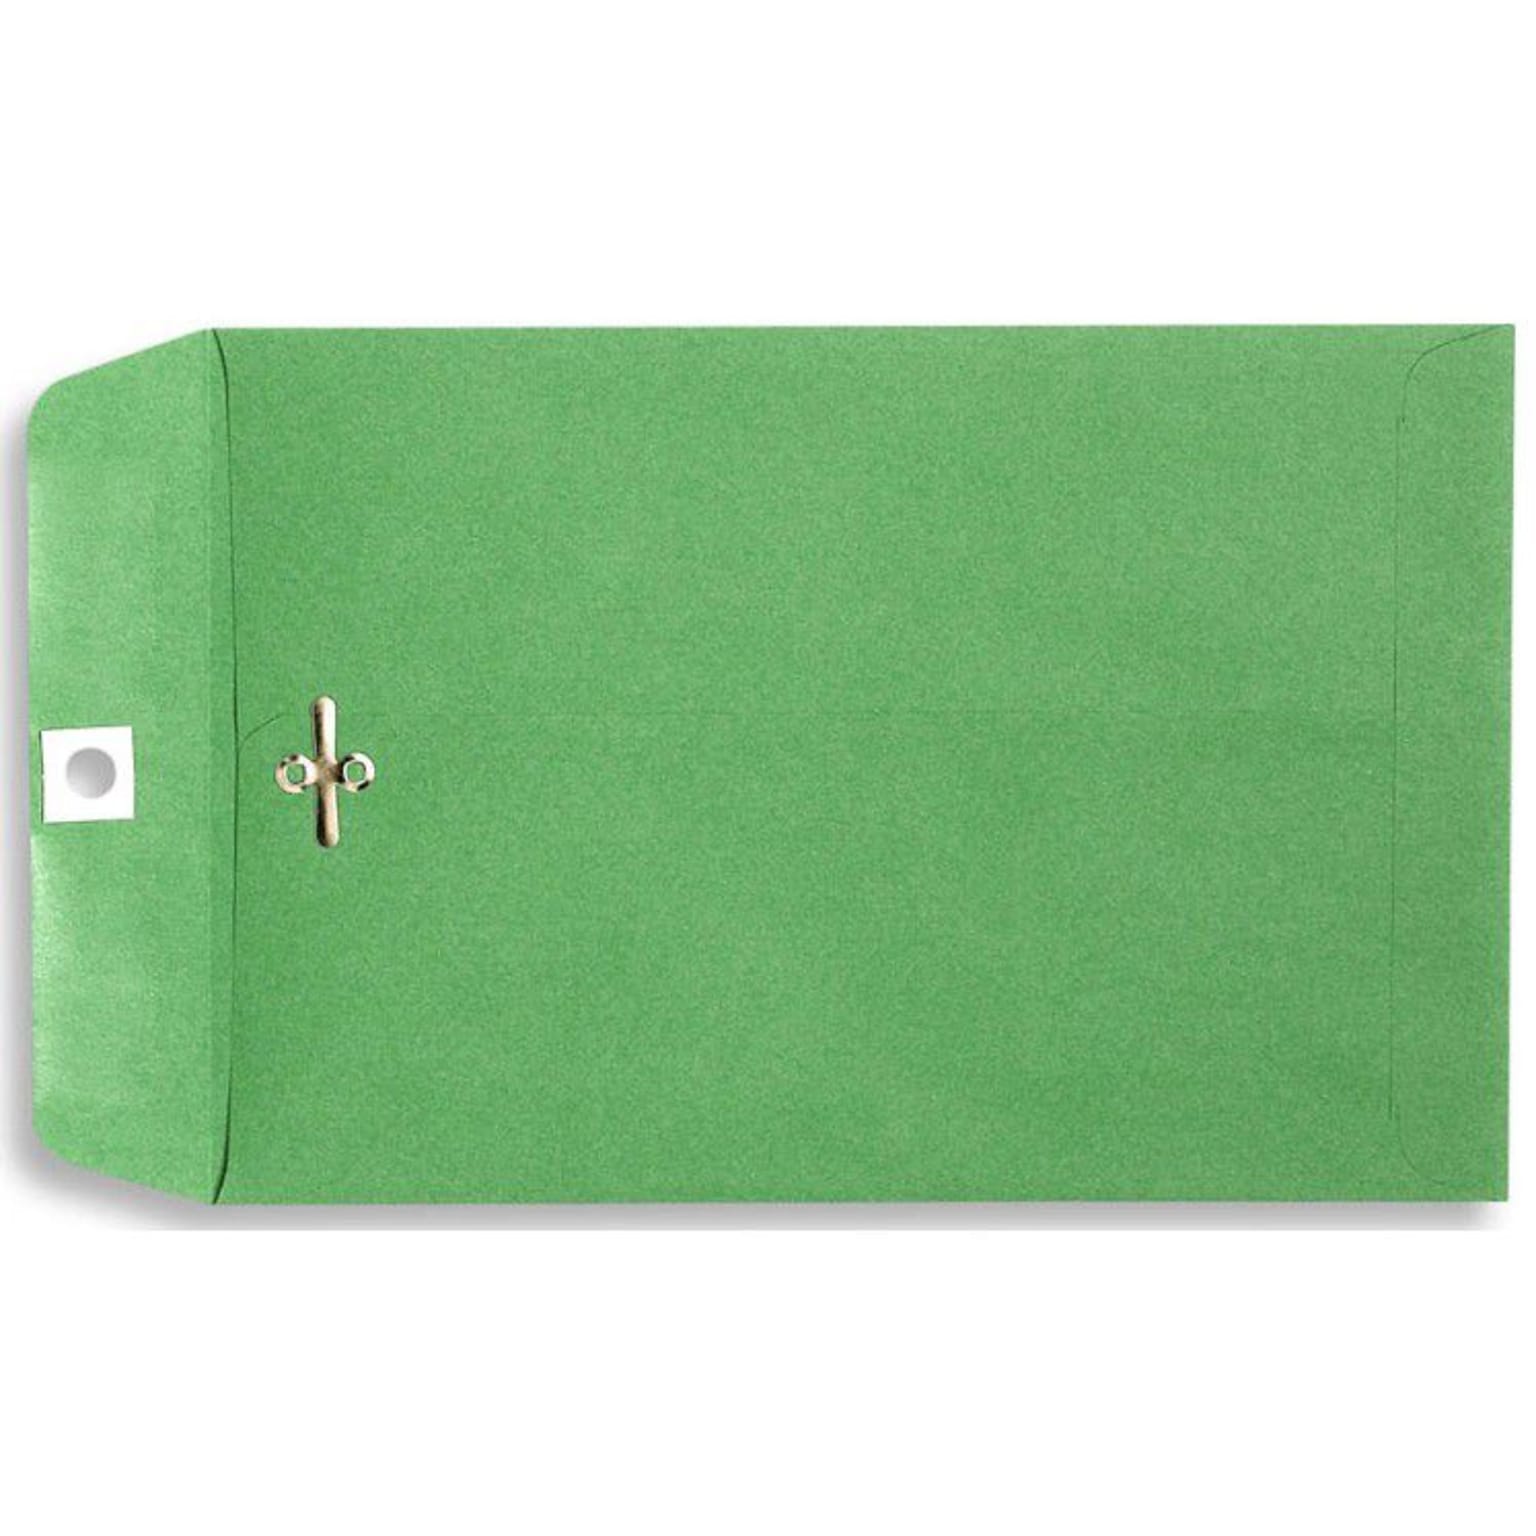 Lux® 9 x 12 Open End Clasp Envelopes; Bright Green, 100/Pk